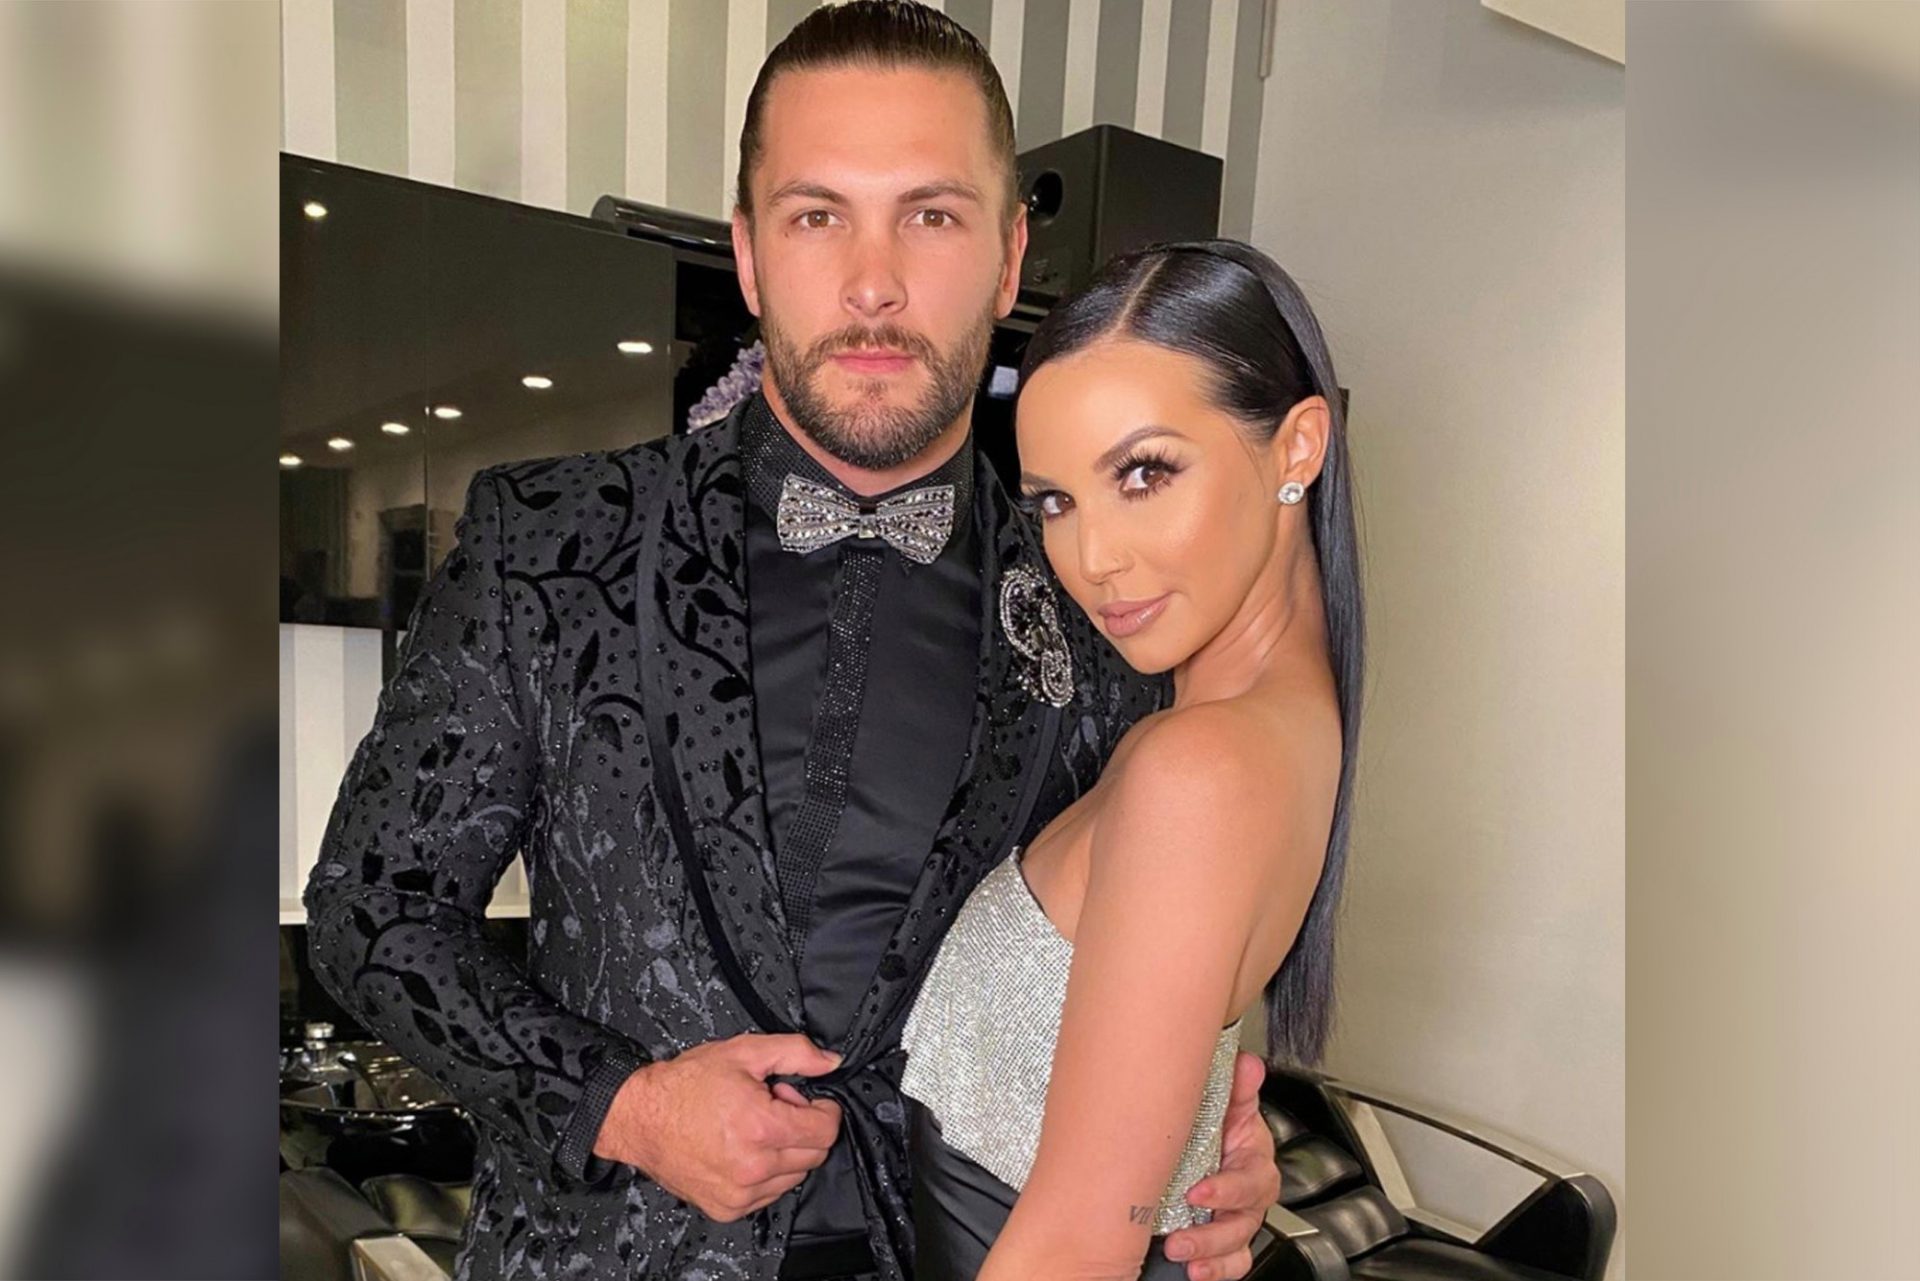 Scheana Shay’s boyfriend pens supportive message after her miscarriage